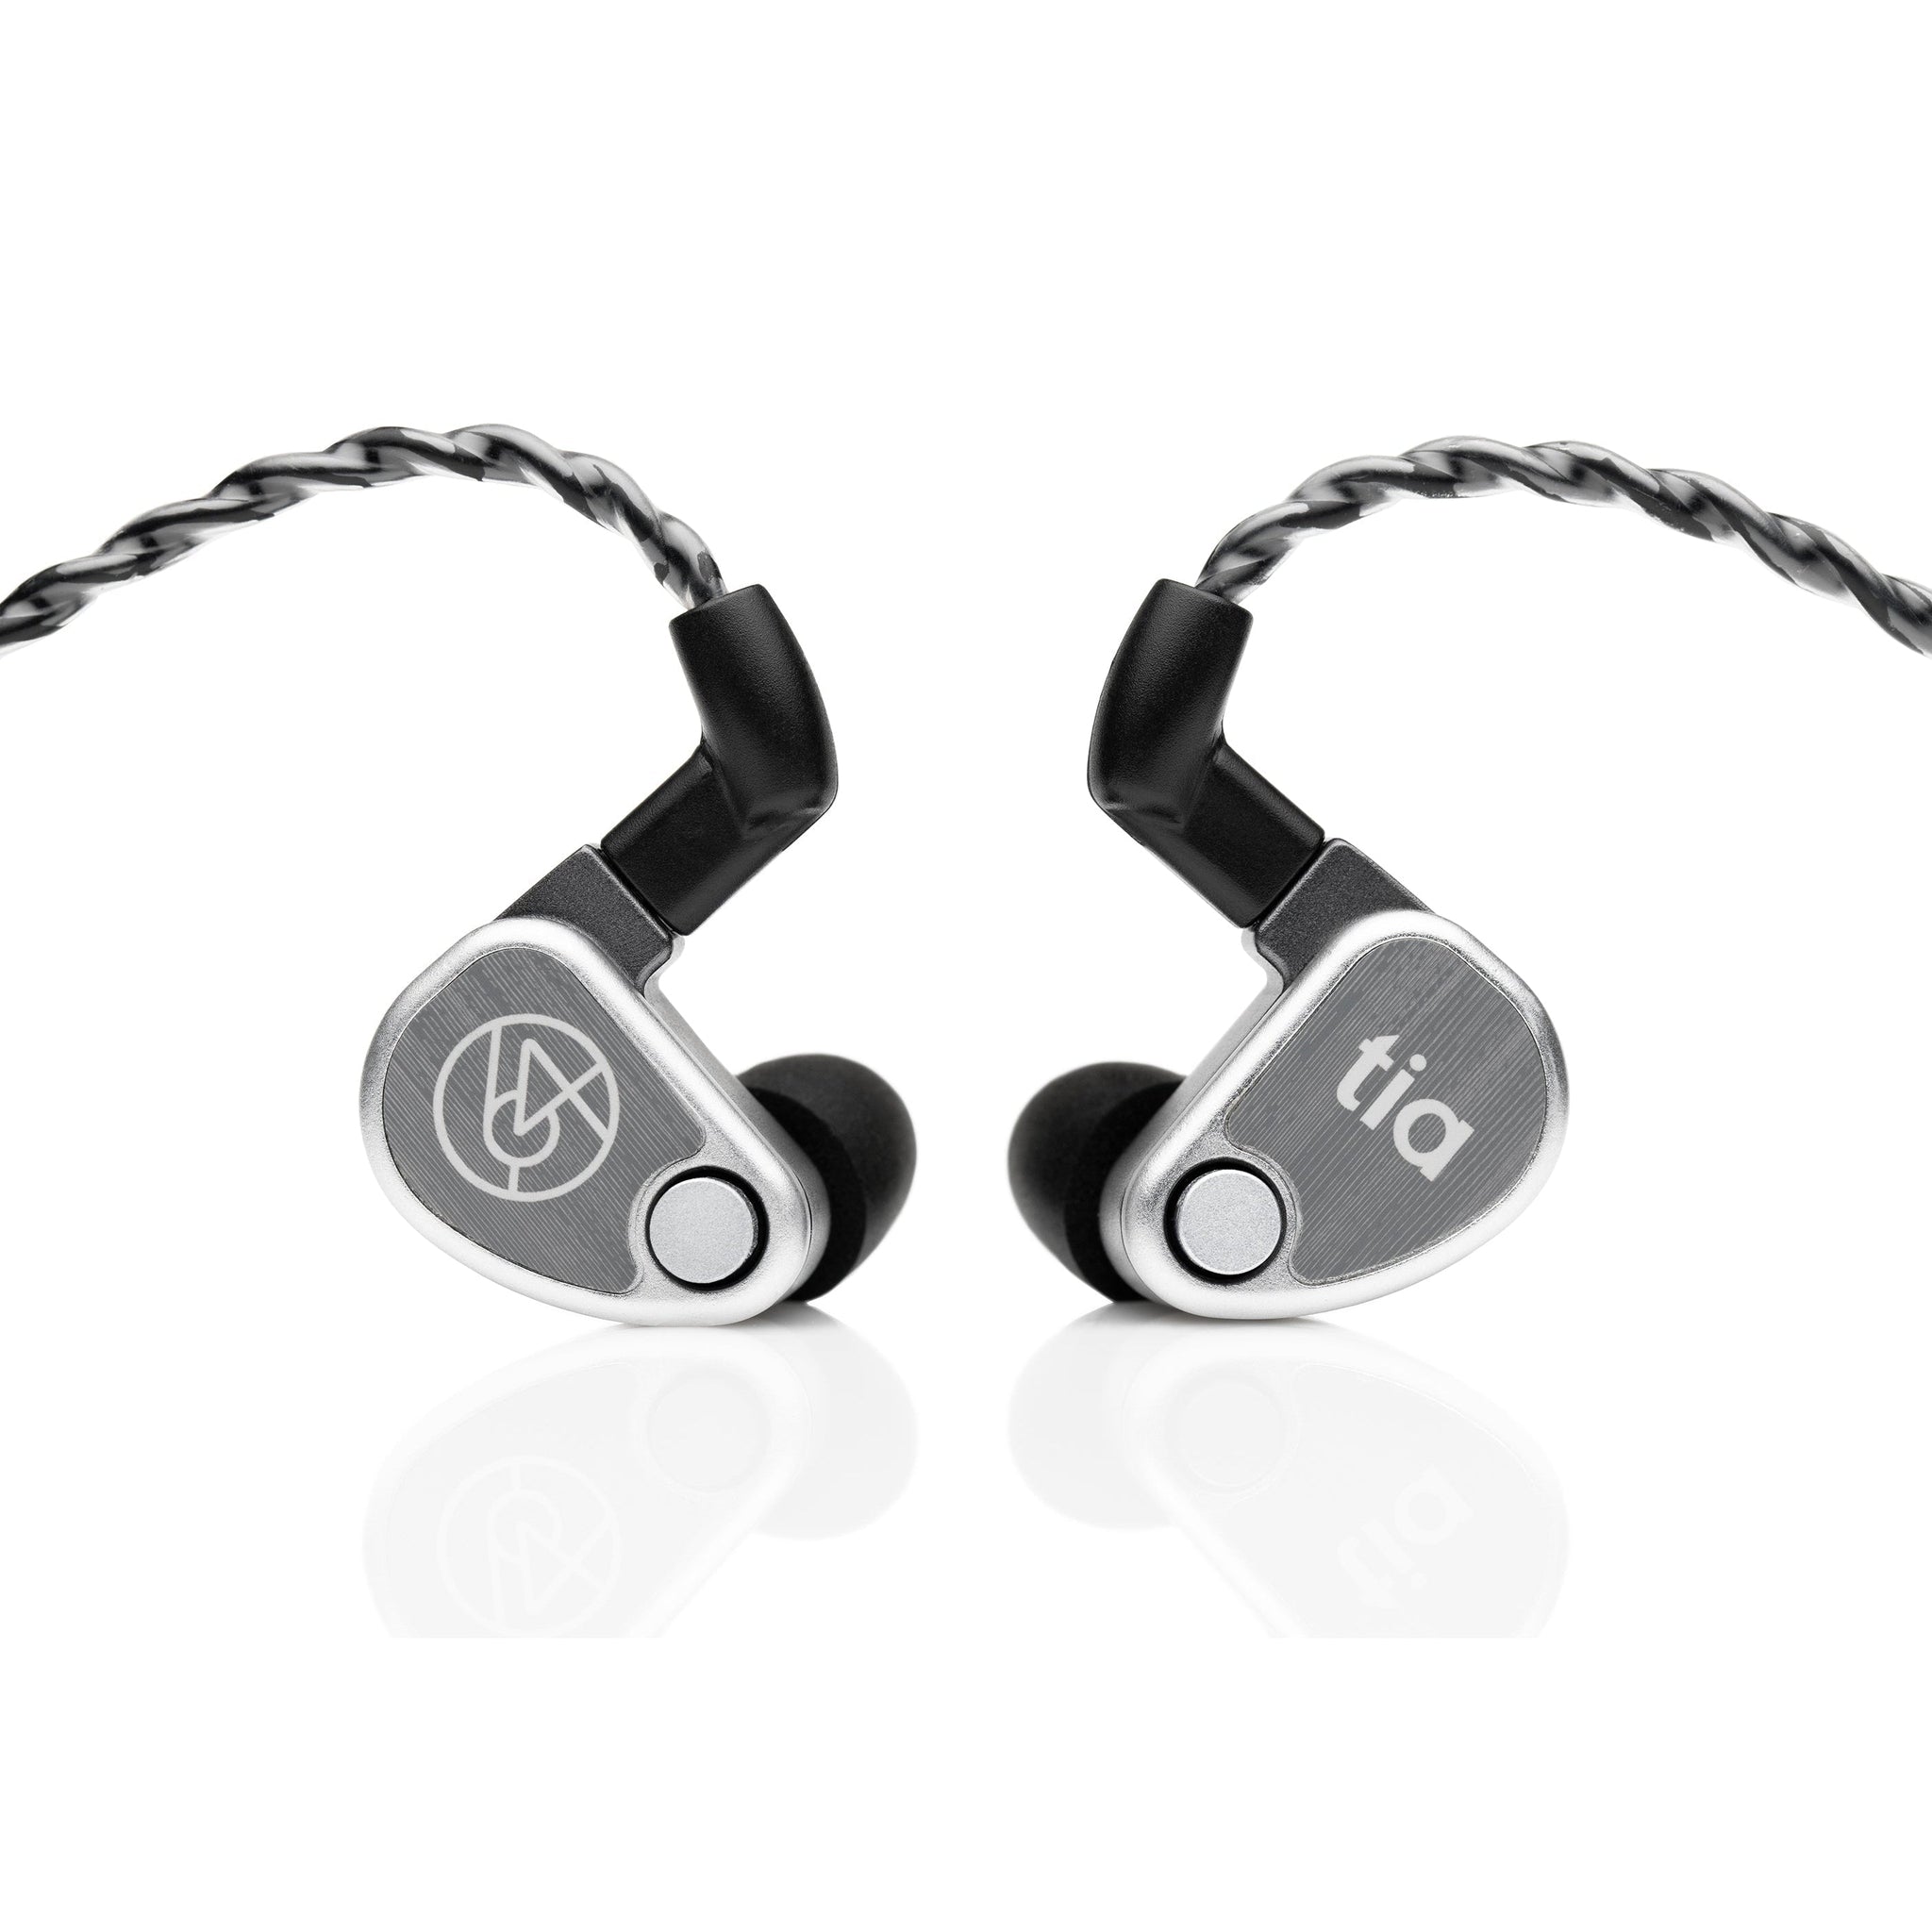 Earphones at Bloom Audio – Tagged 